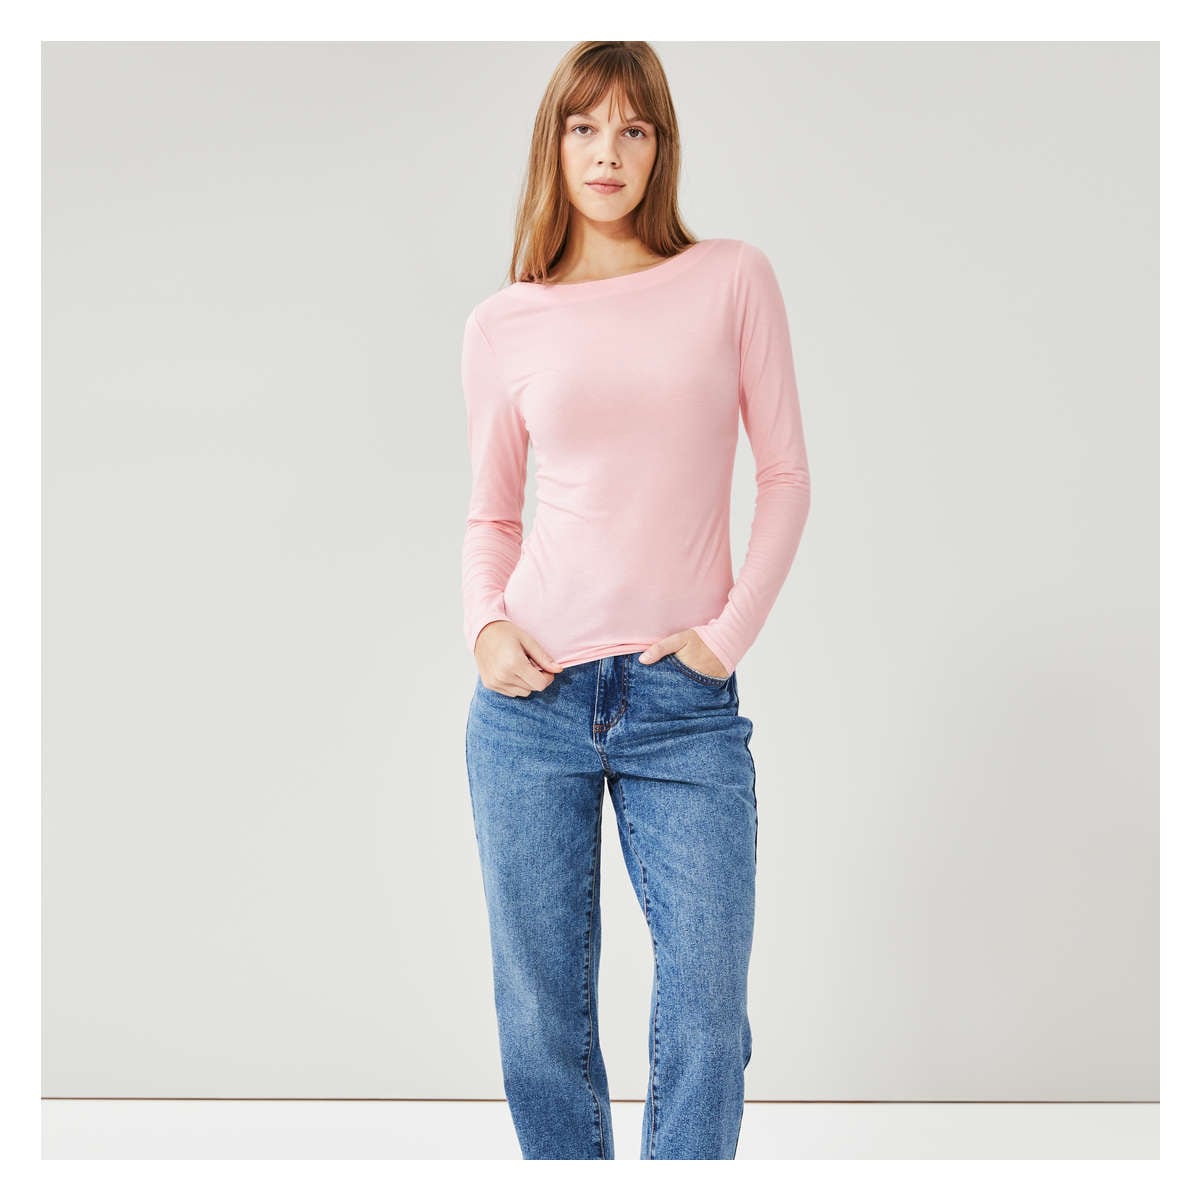 Boat Neck Long Sleeve in Bright Pink from Joe Fresh